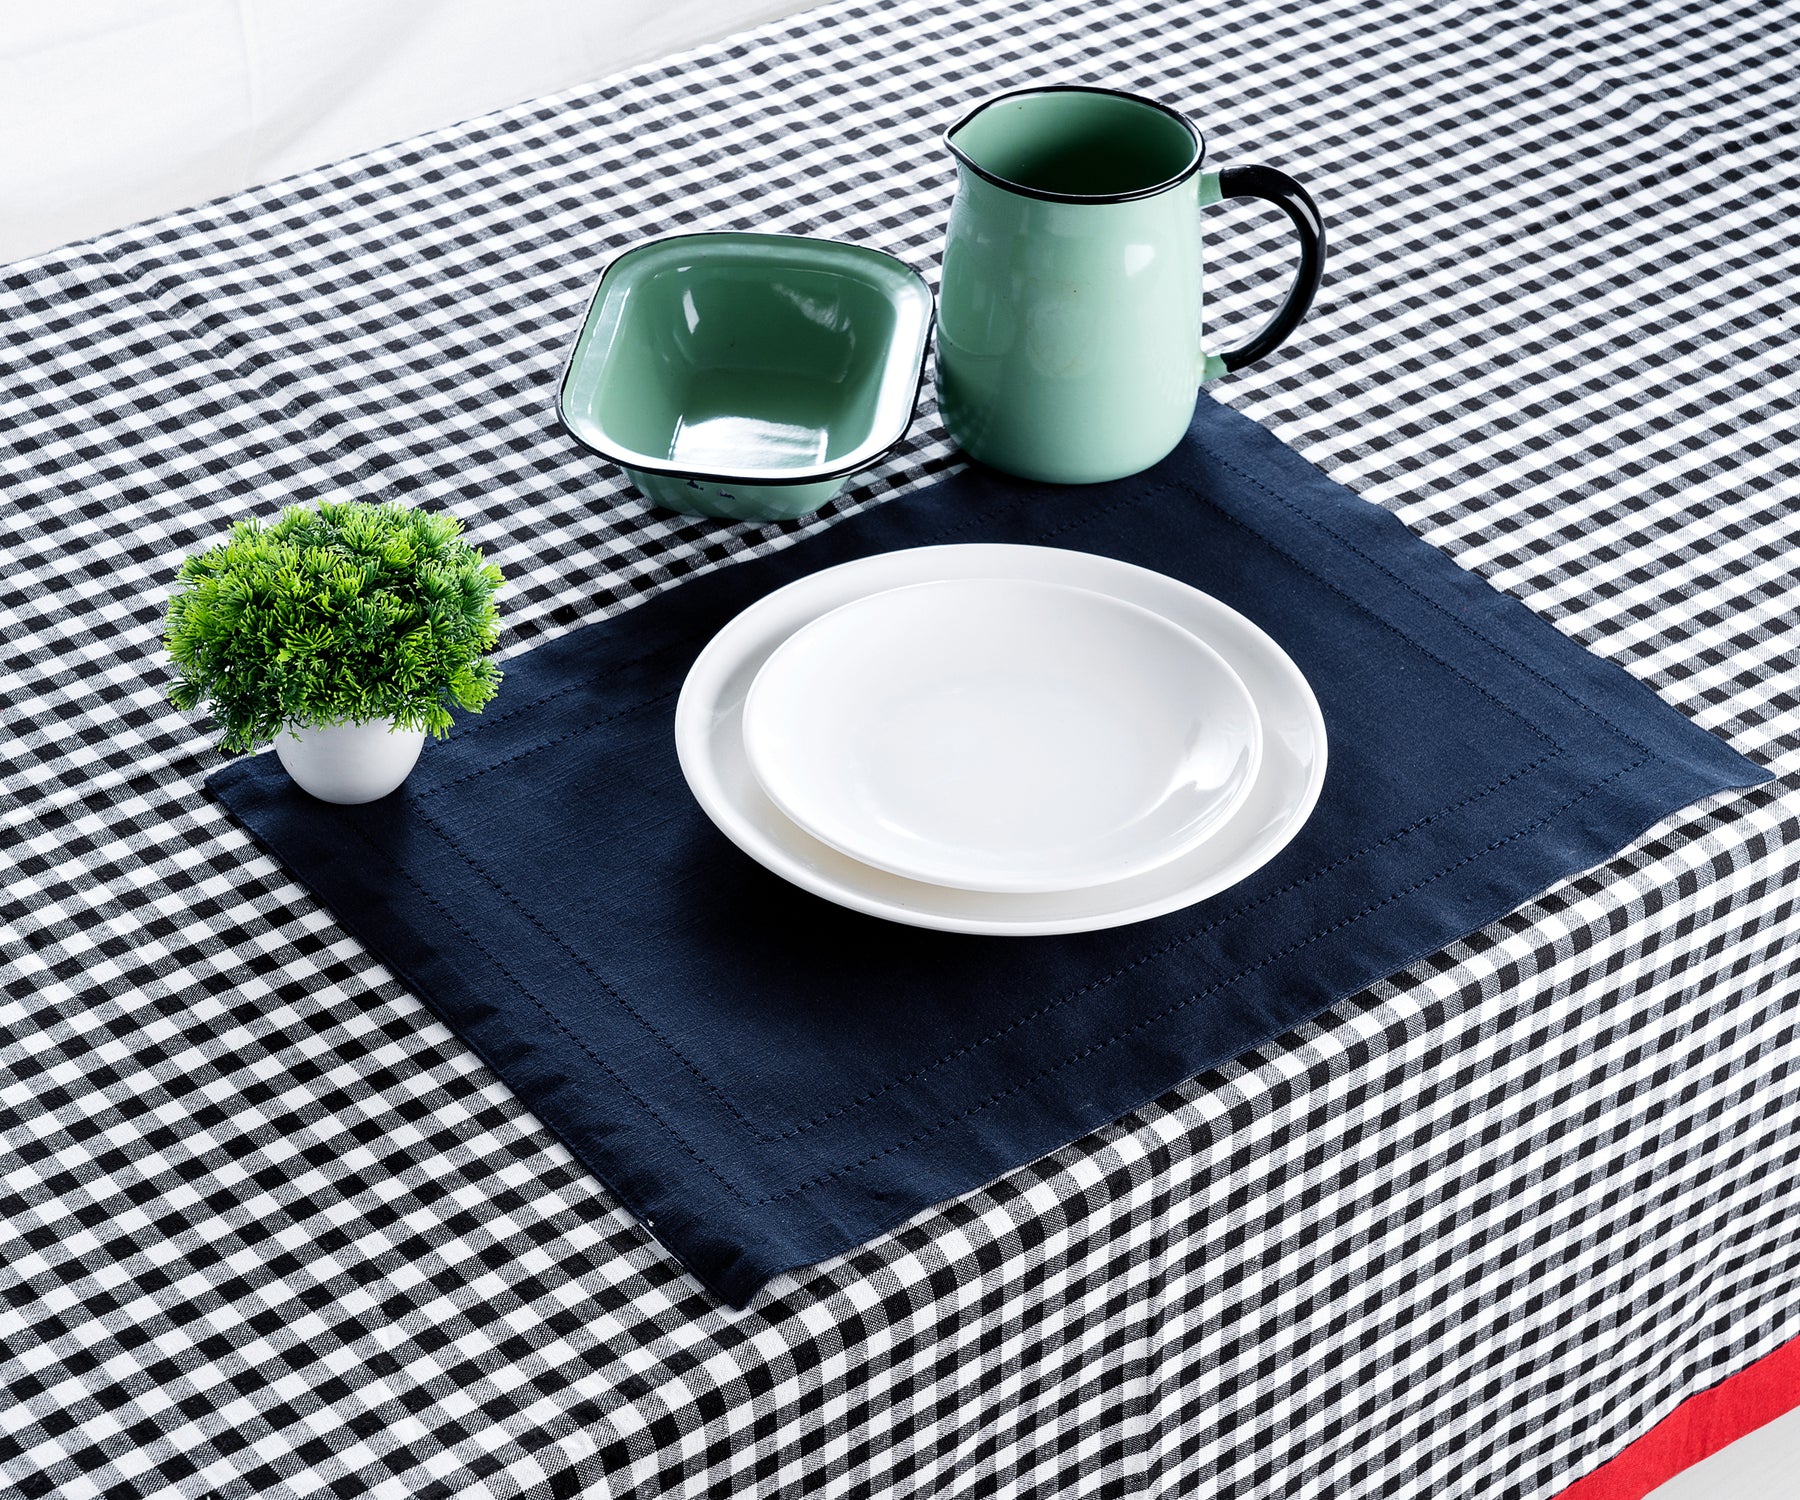 Classic Red and White Checkered Tablecloth - Timeless Design